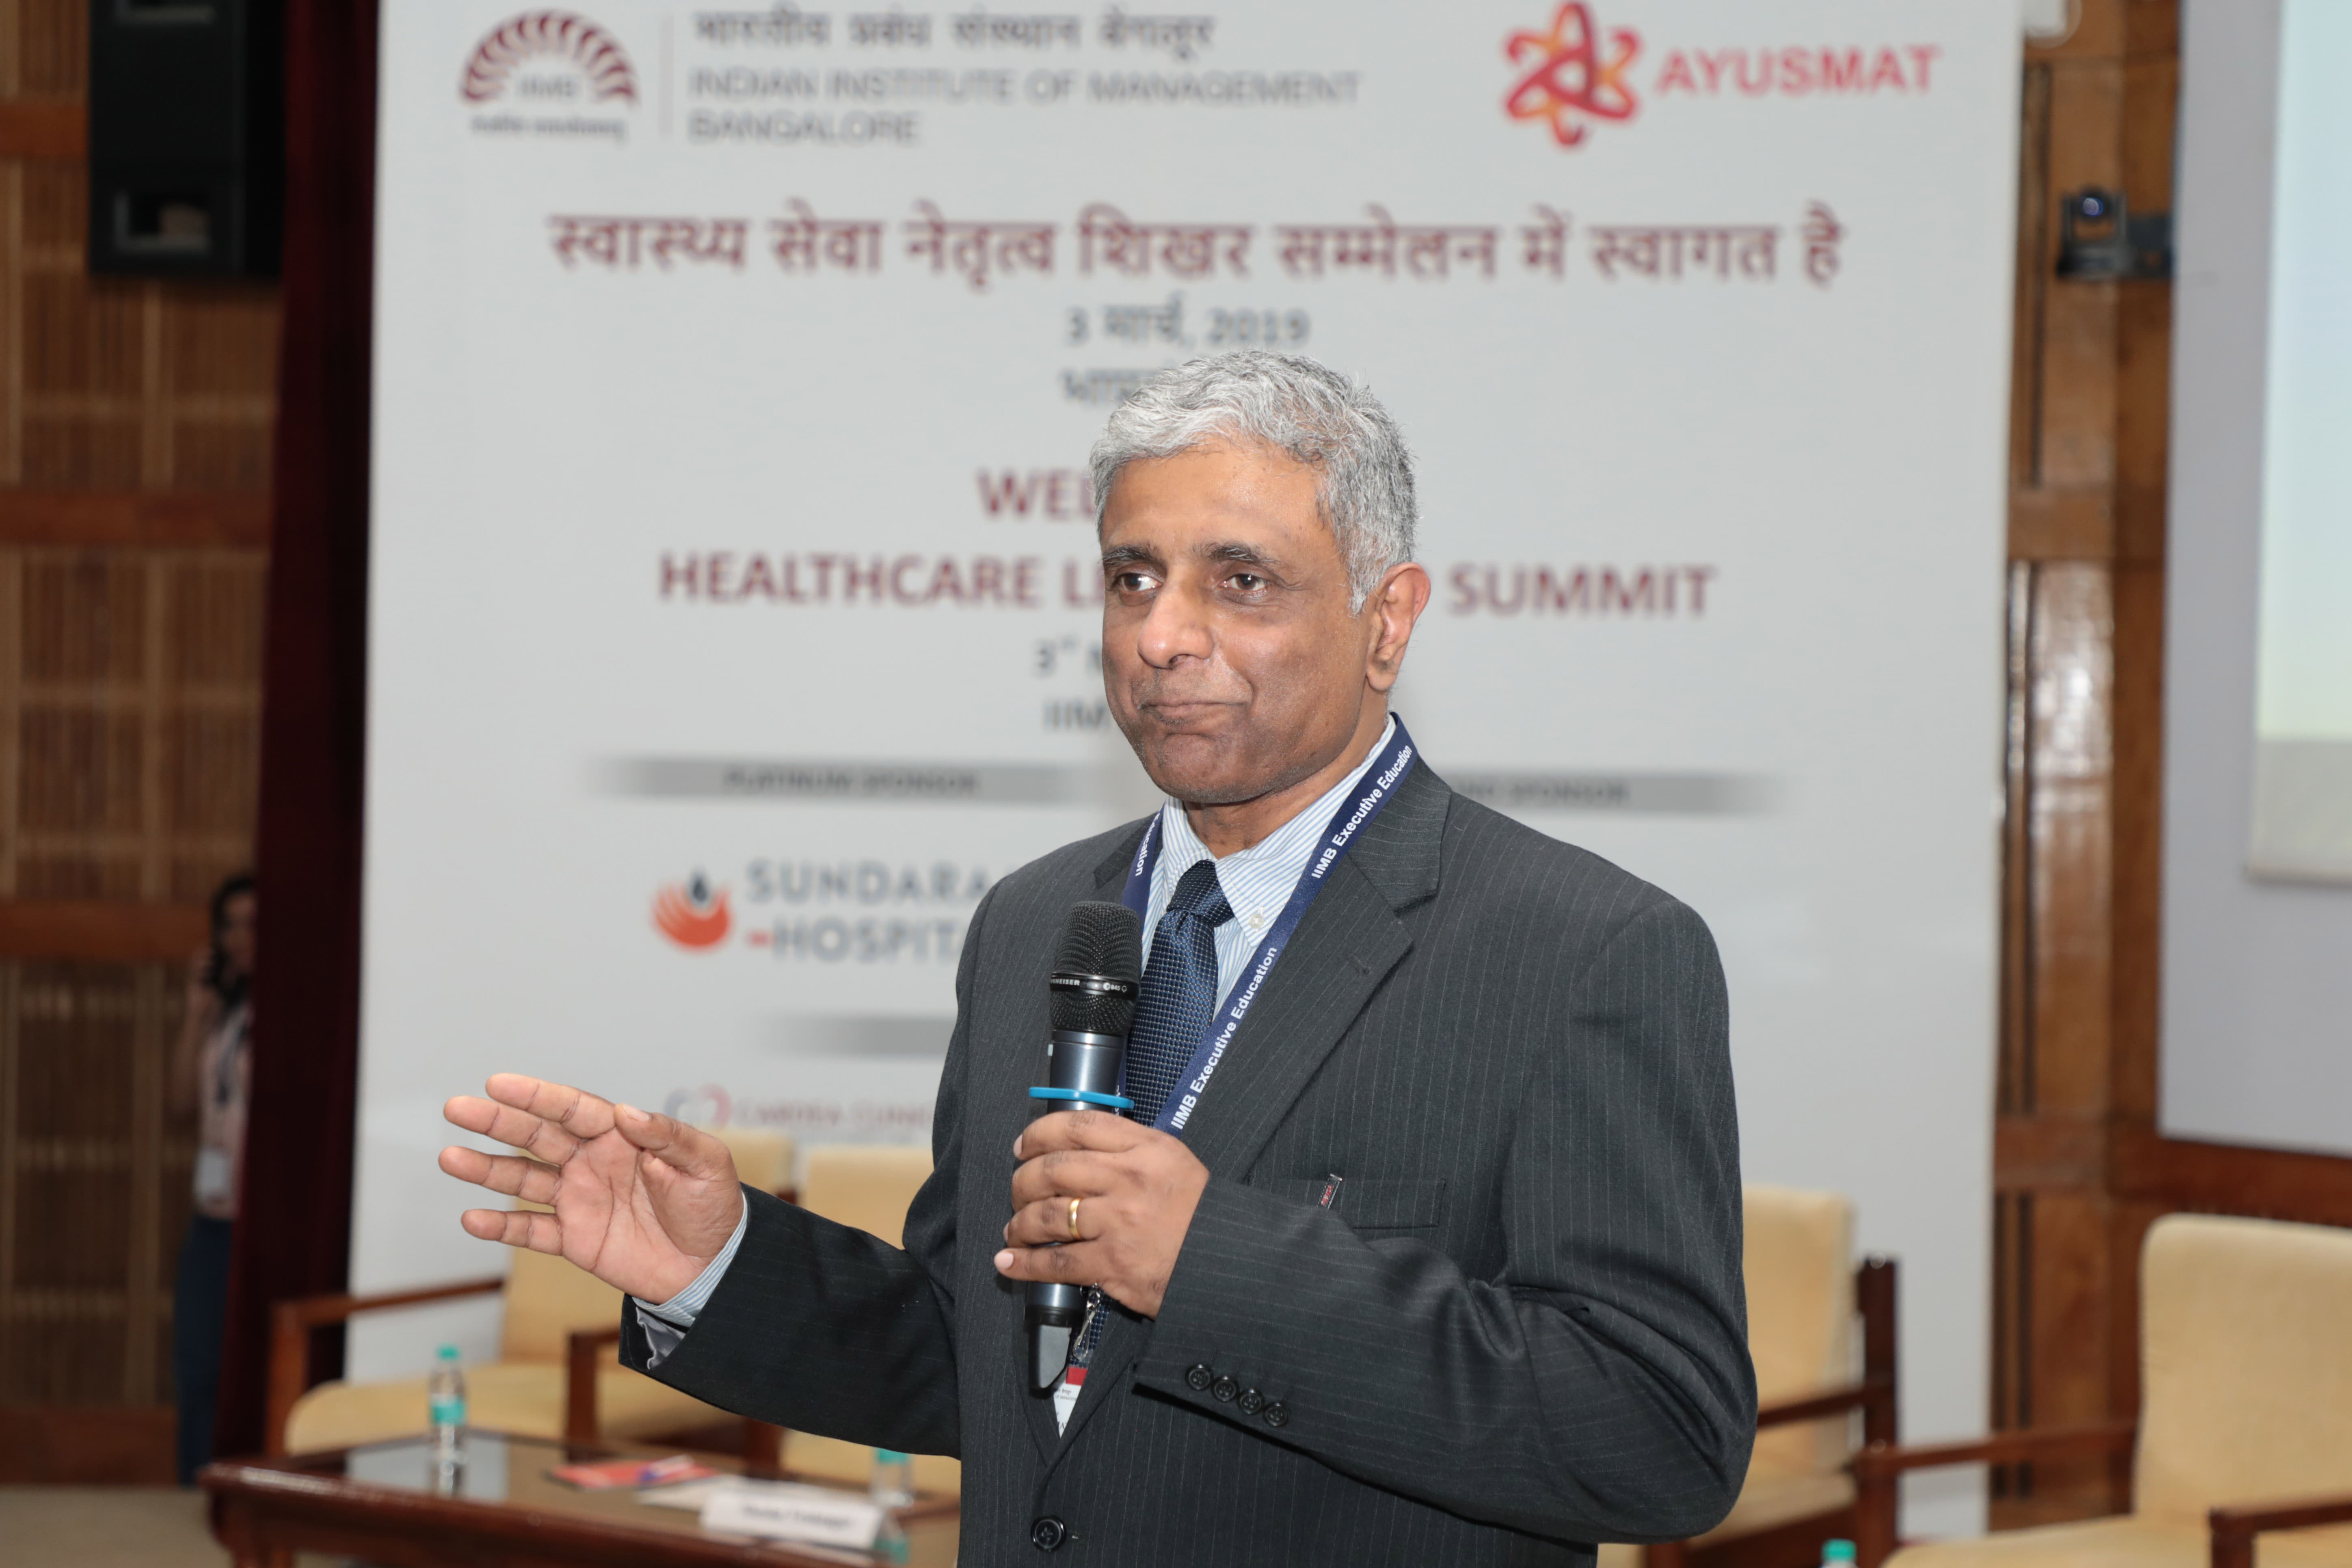 Prof. Shankar Venkatagiri, Programme Director, General Management Programme for Healthcare Executives (GMHE), introduces the programme to the audience.